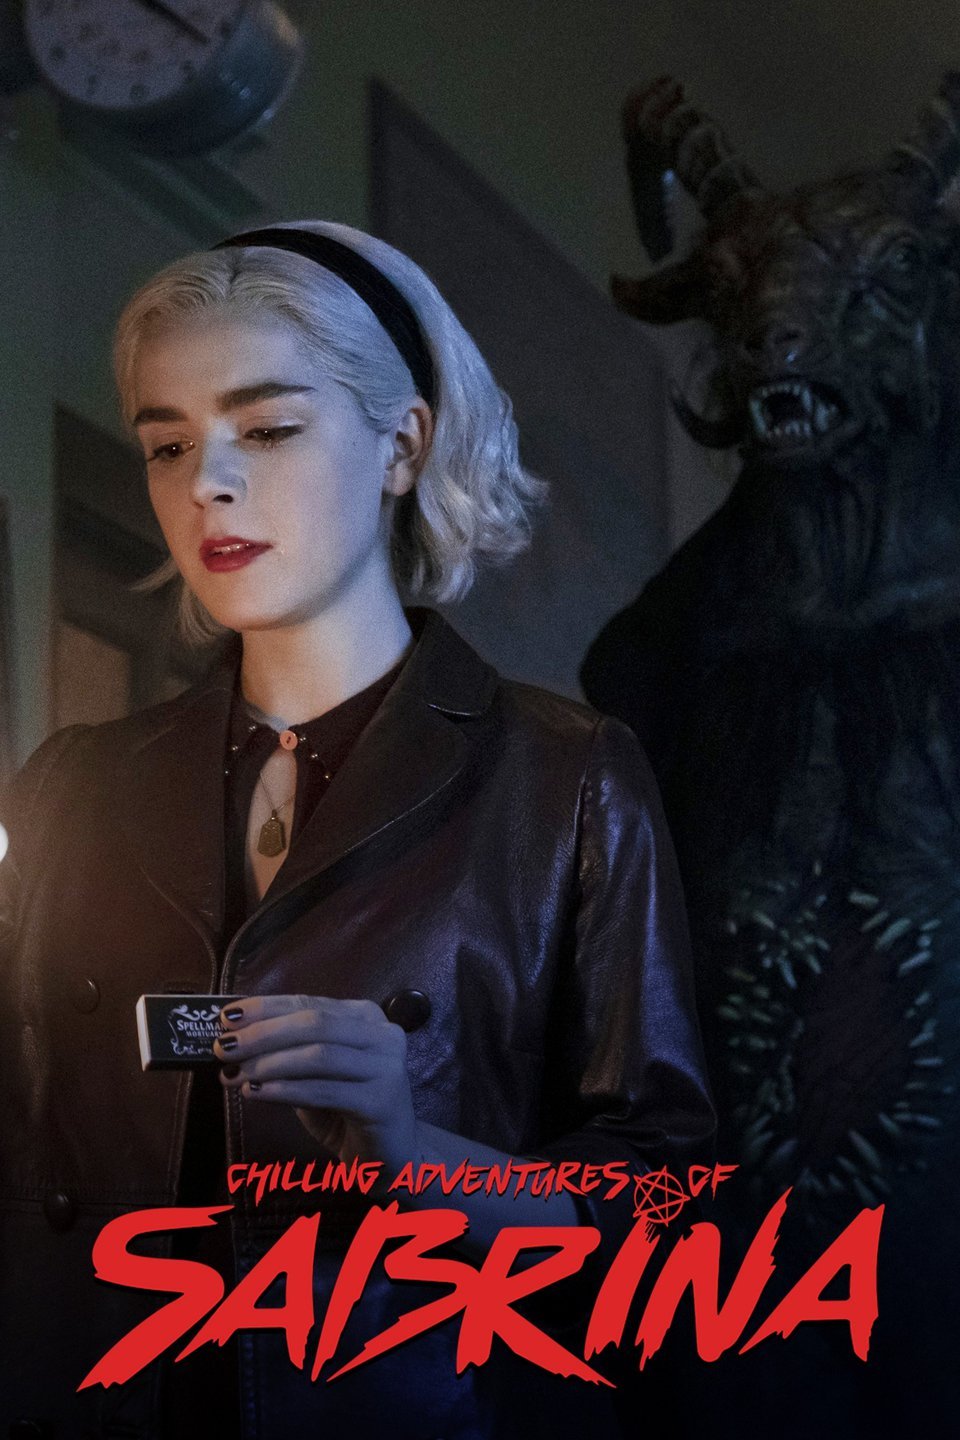 Chilling Adventures of Sabrina (2019) 720p HEVC HDRip S02 Complete NF Series [Dual Audio] [Hindi or English] x265 AAC ESubs [250MB]